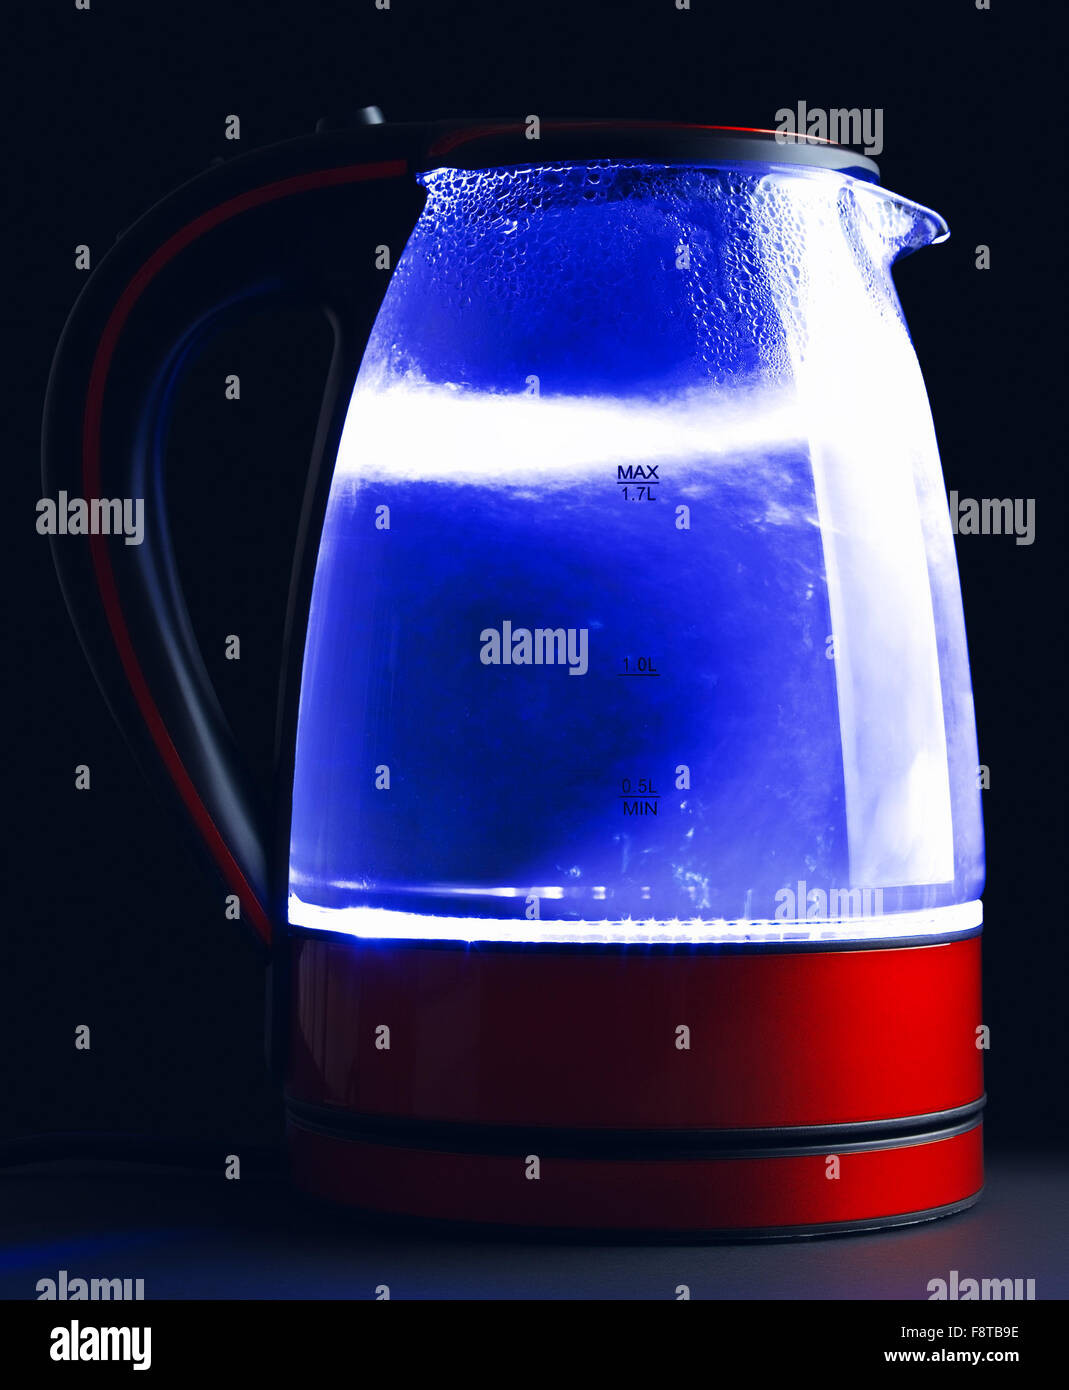 https://c8.alamy.com/comp/F8TB9E/glass-electric-kettle-with-boiling-water-black-background-F8TB9E.jpg